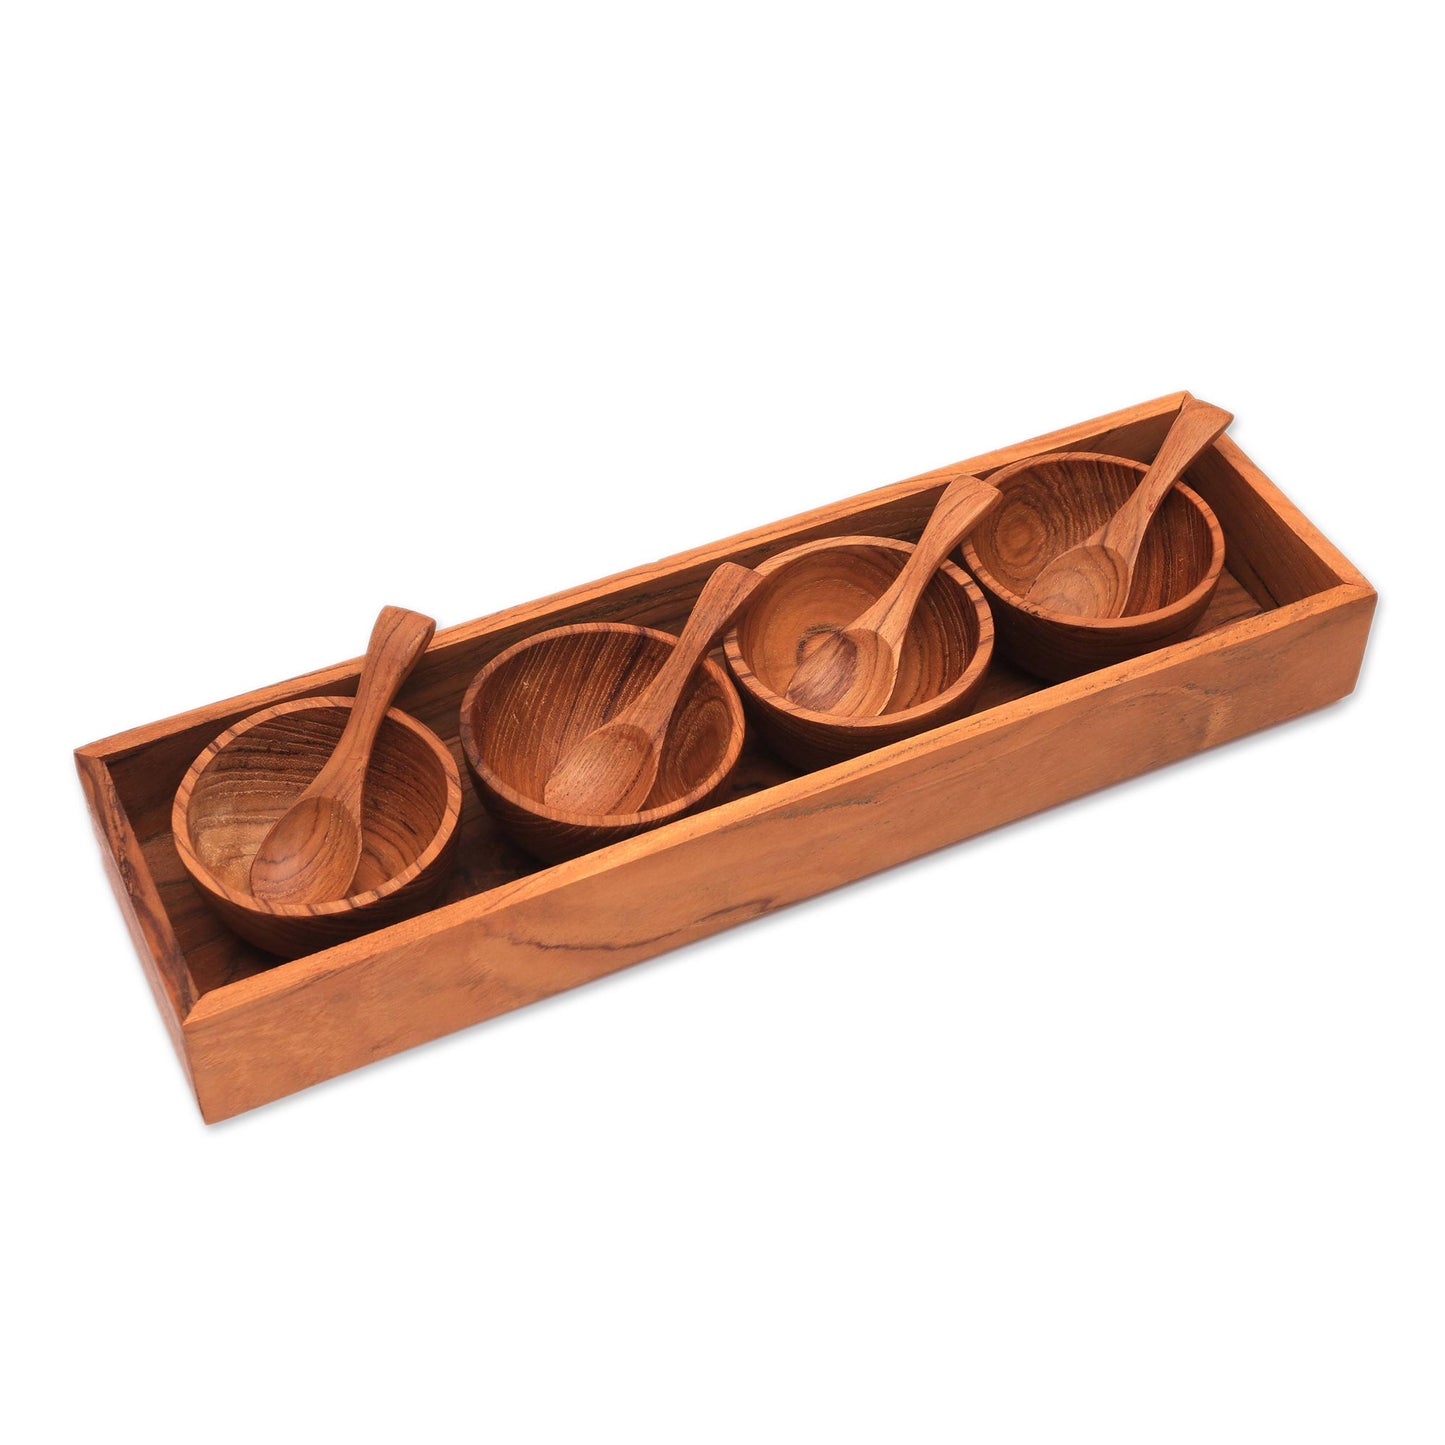 Date Night Hand-Carved Wood Condiment Set from Bali (9 Piece)